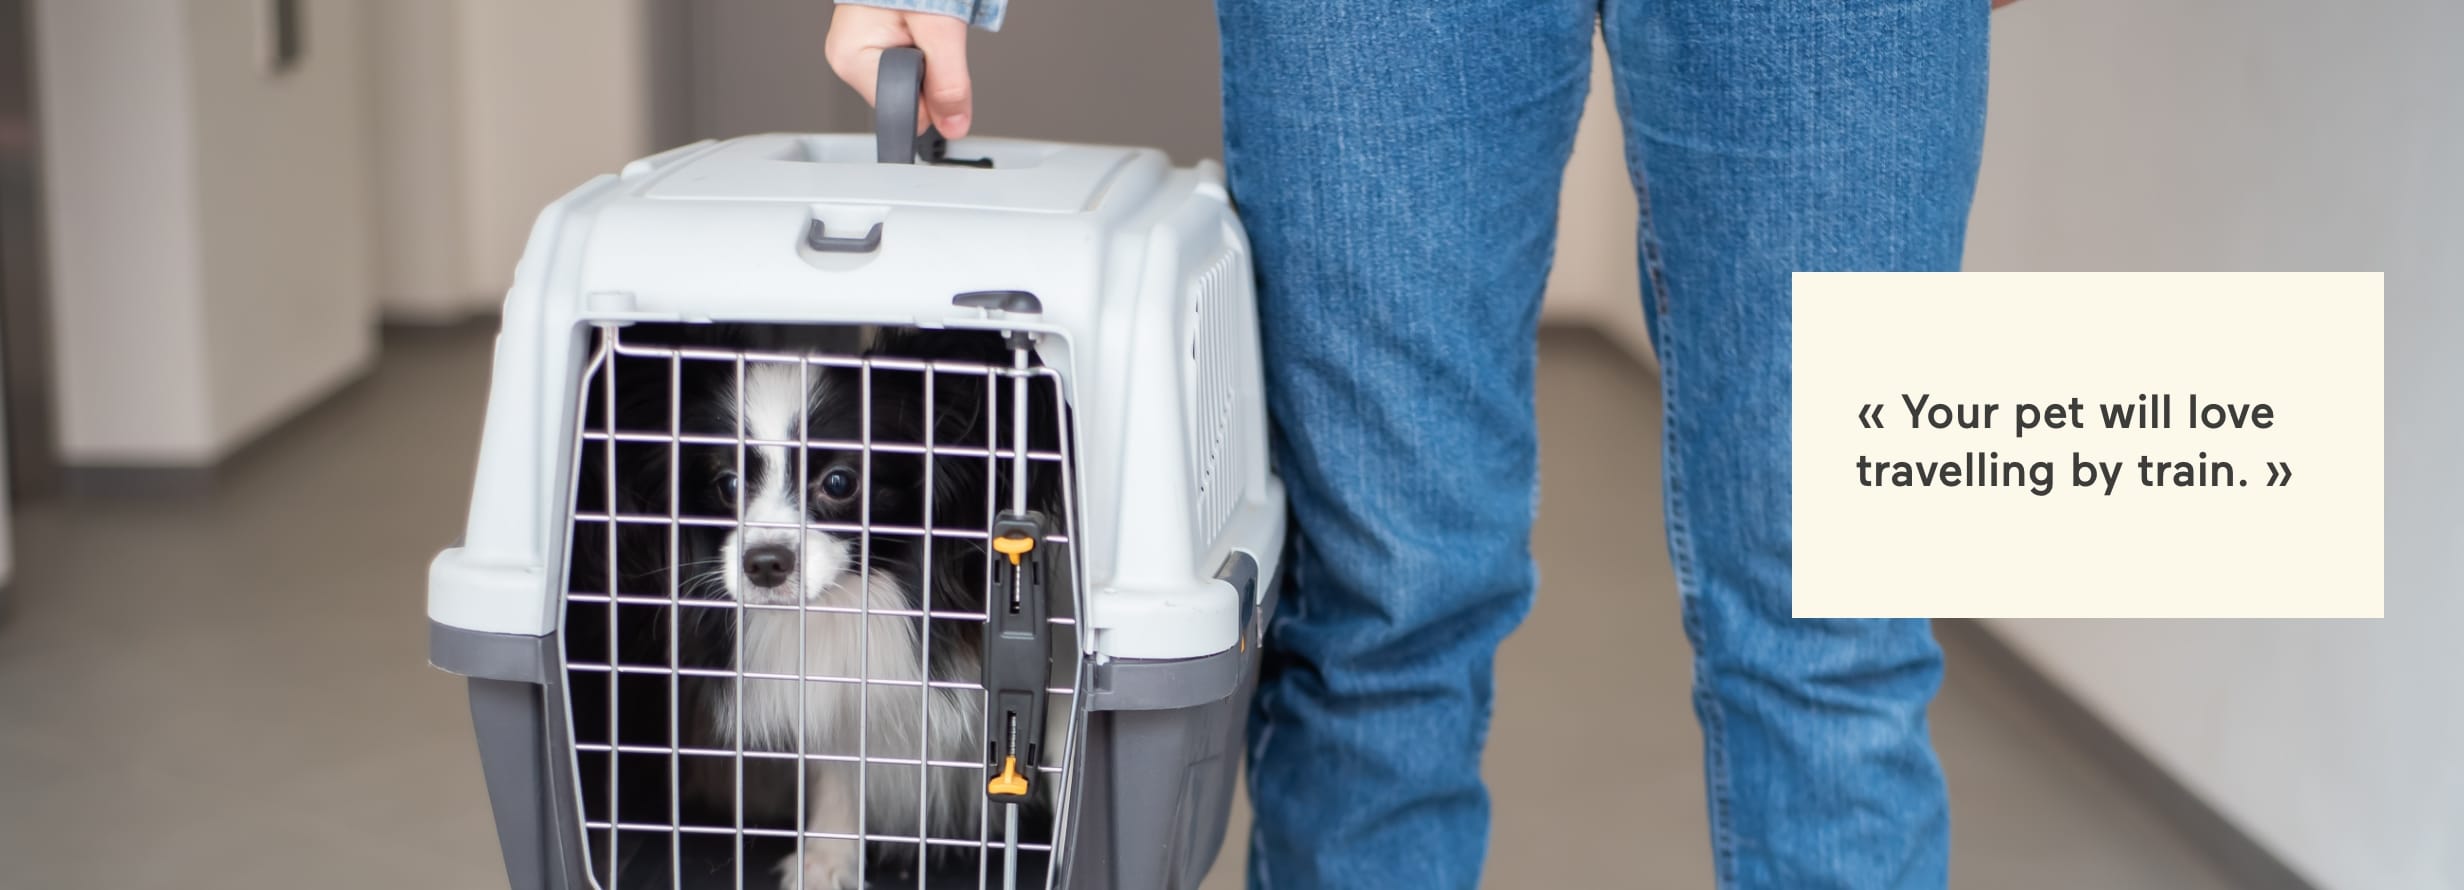 your pet will love travelling by train